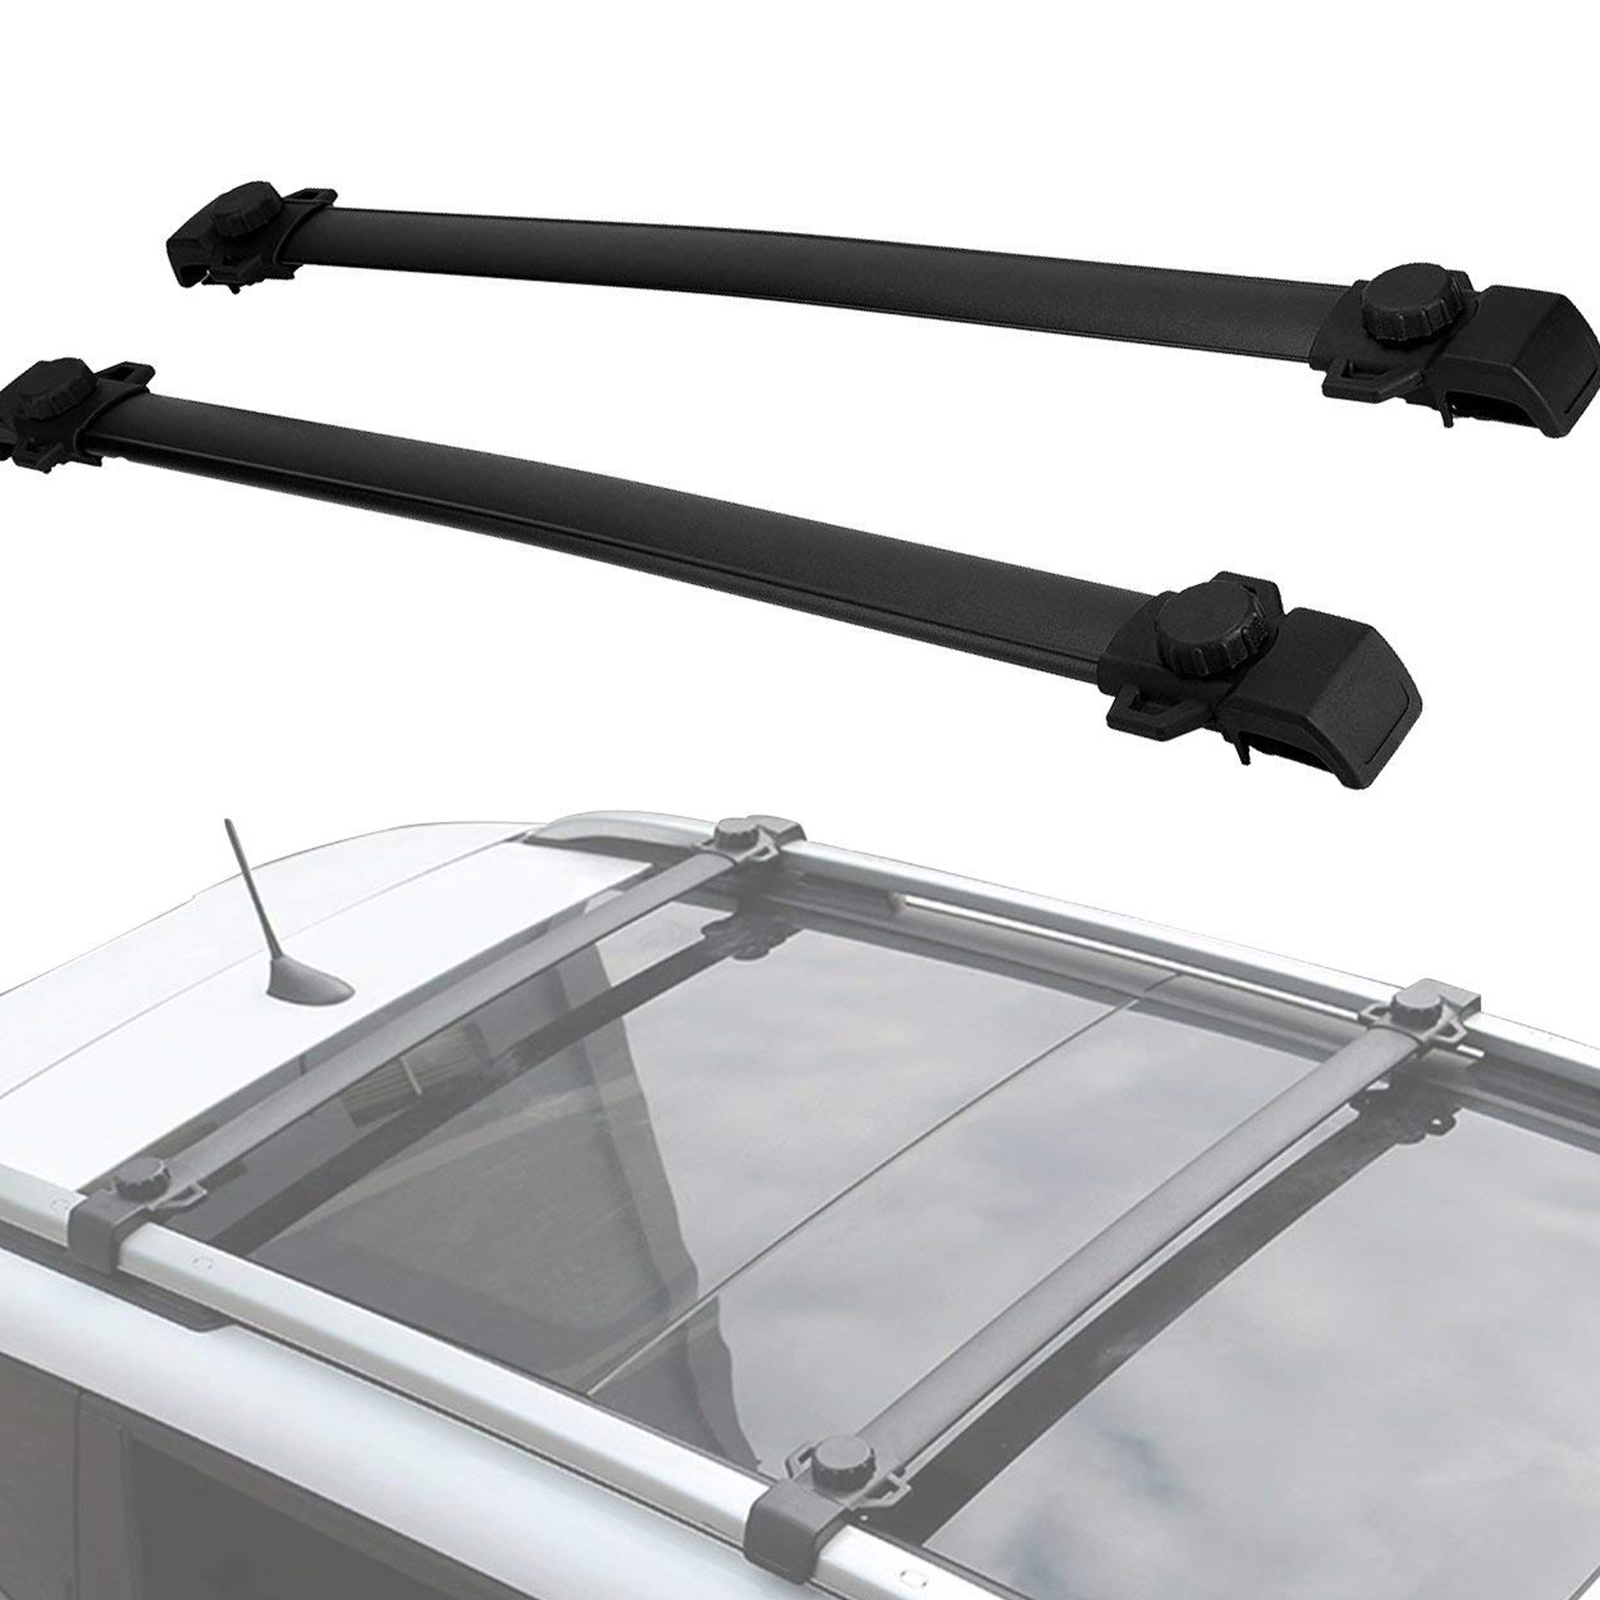 OE Style Roof Rack Cross Bars Carrier For Jeep Renegade 2014 2015 2016 2017 2018 | eBay 2017 Jeep Renegade Roof Rack Cross Bars